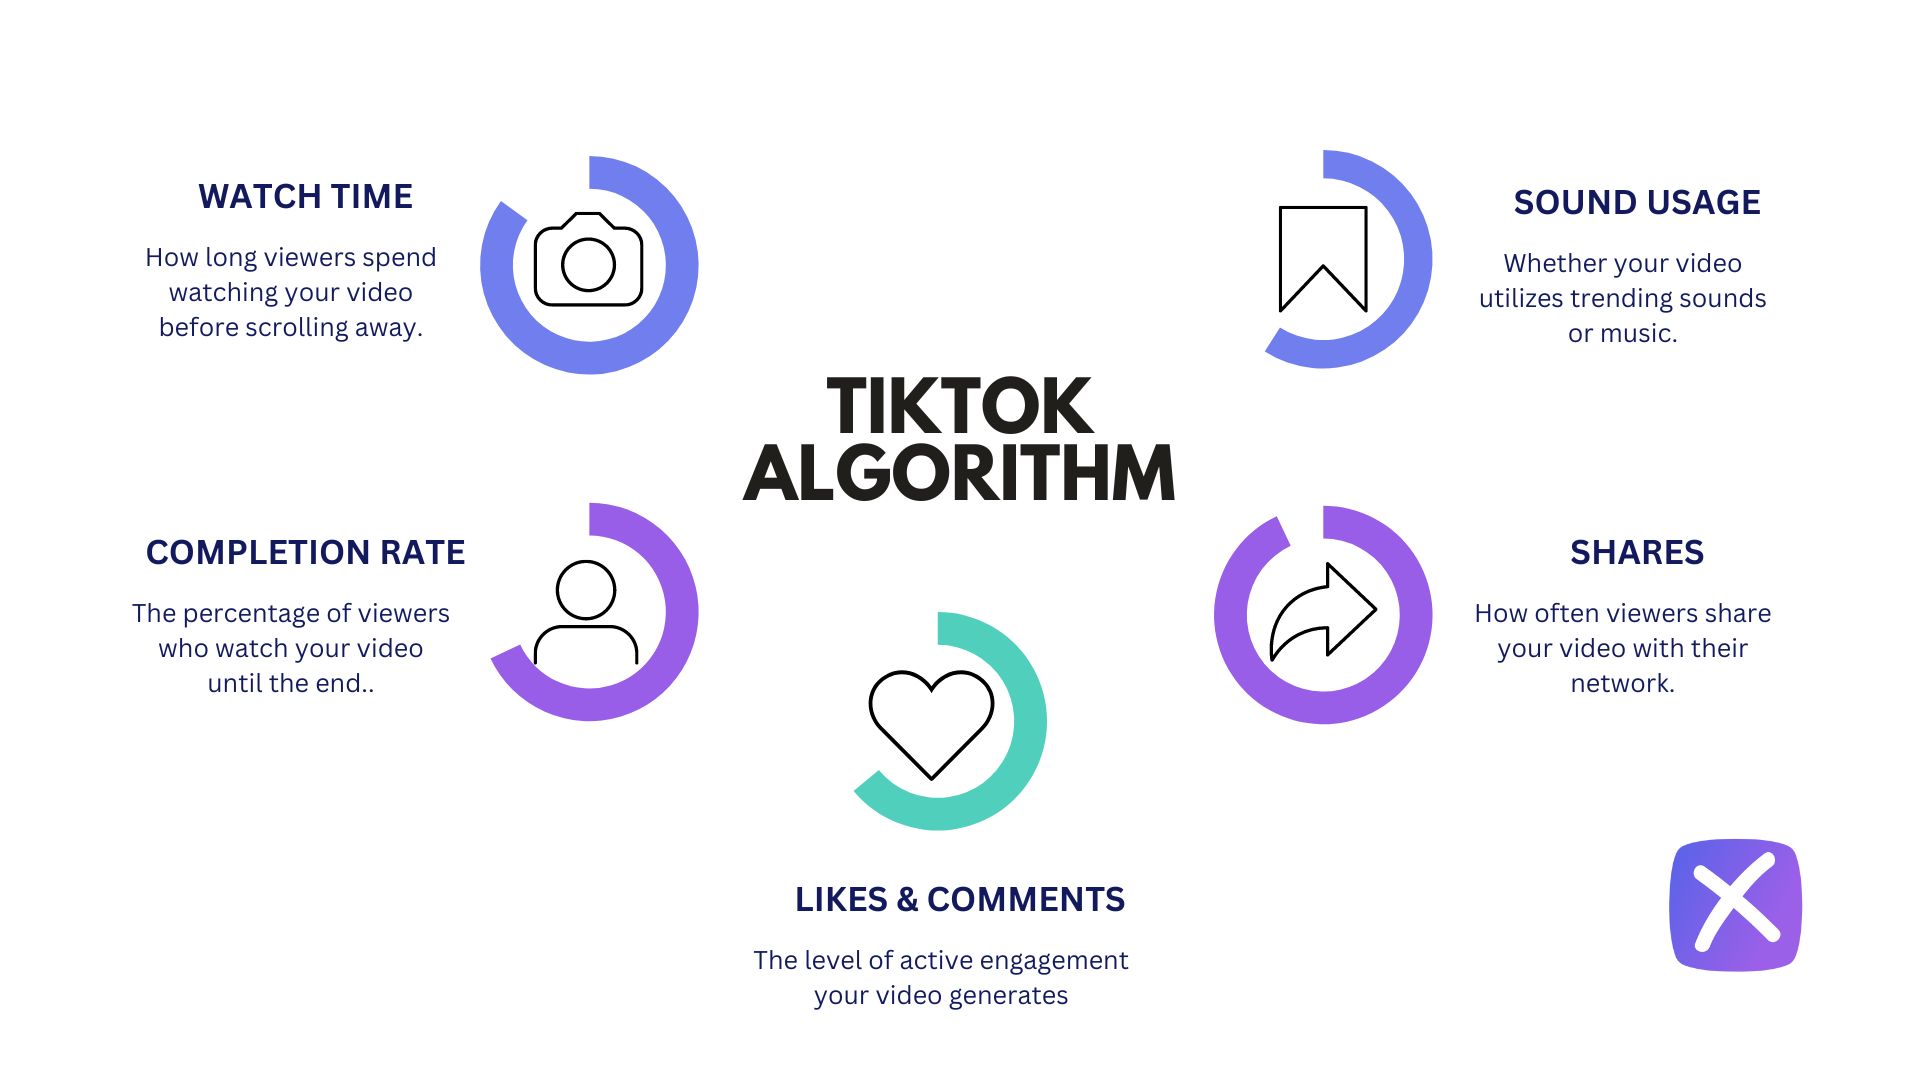 Tiktok algorithm factors include 1. Watch time, 2. Completion rate, 3. Likes, comments, shares, 4. Shares, and 5. Sound usage.)